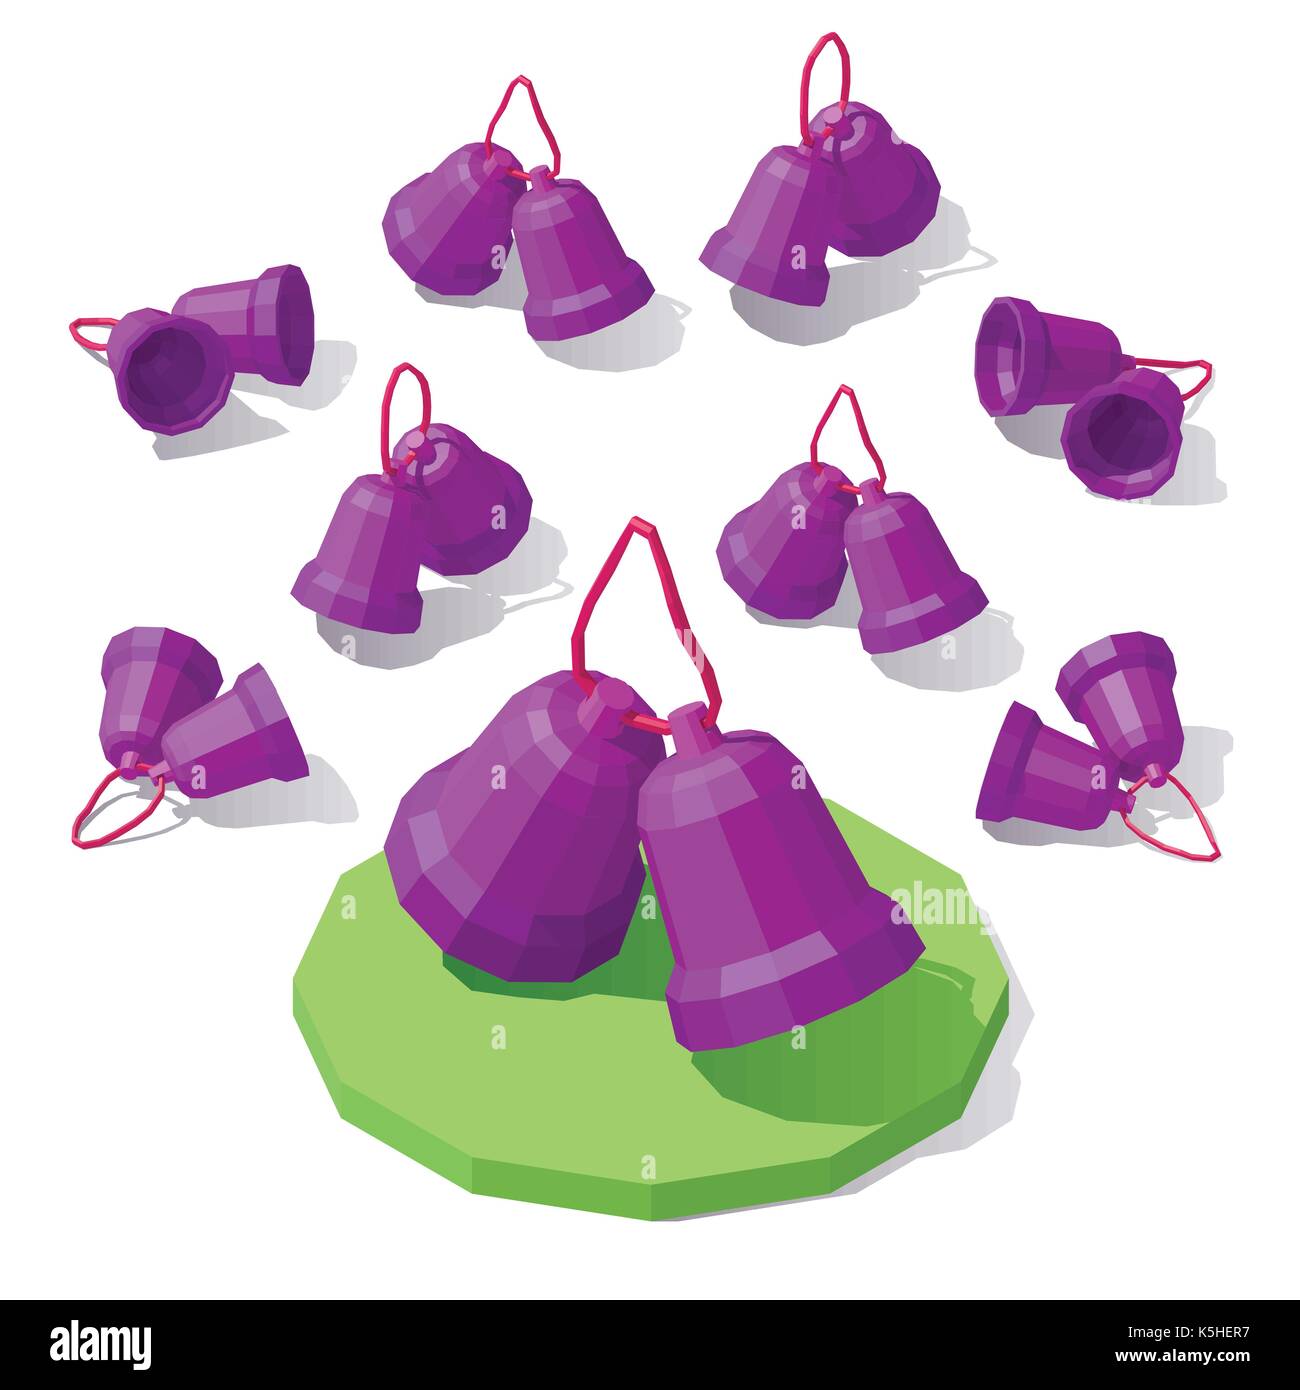 Lowpoly Christmas toy bells Stock Vector